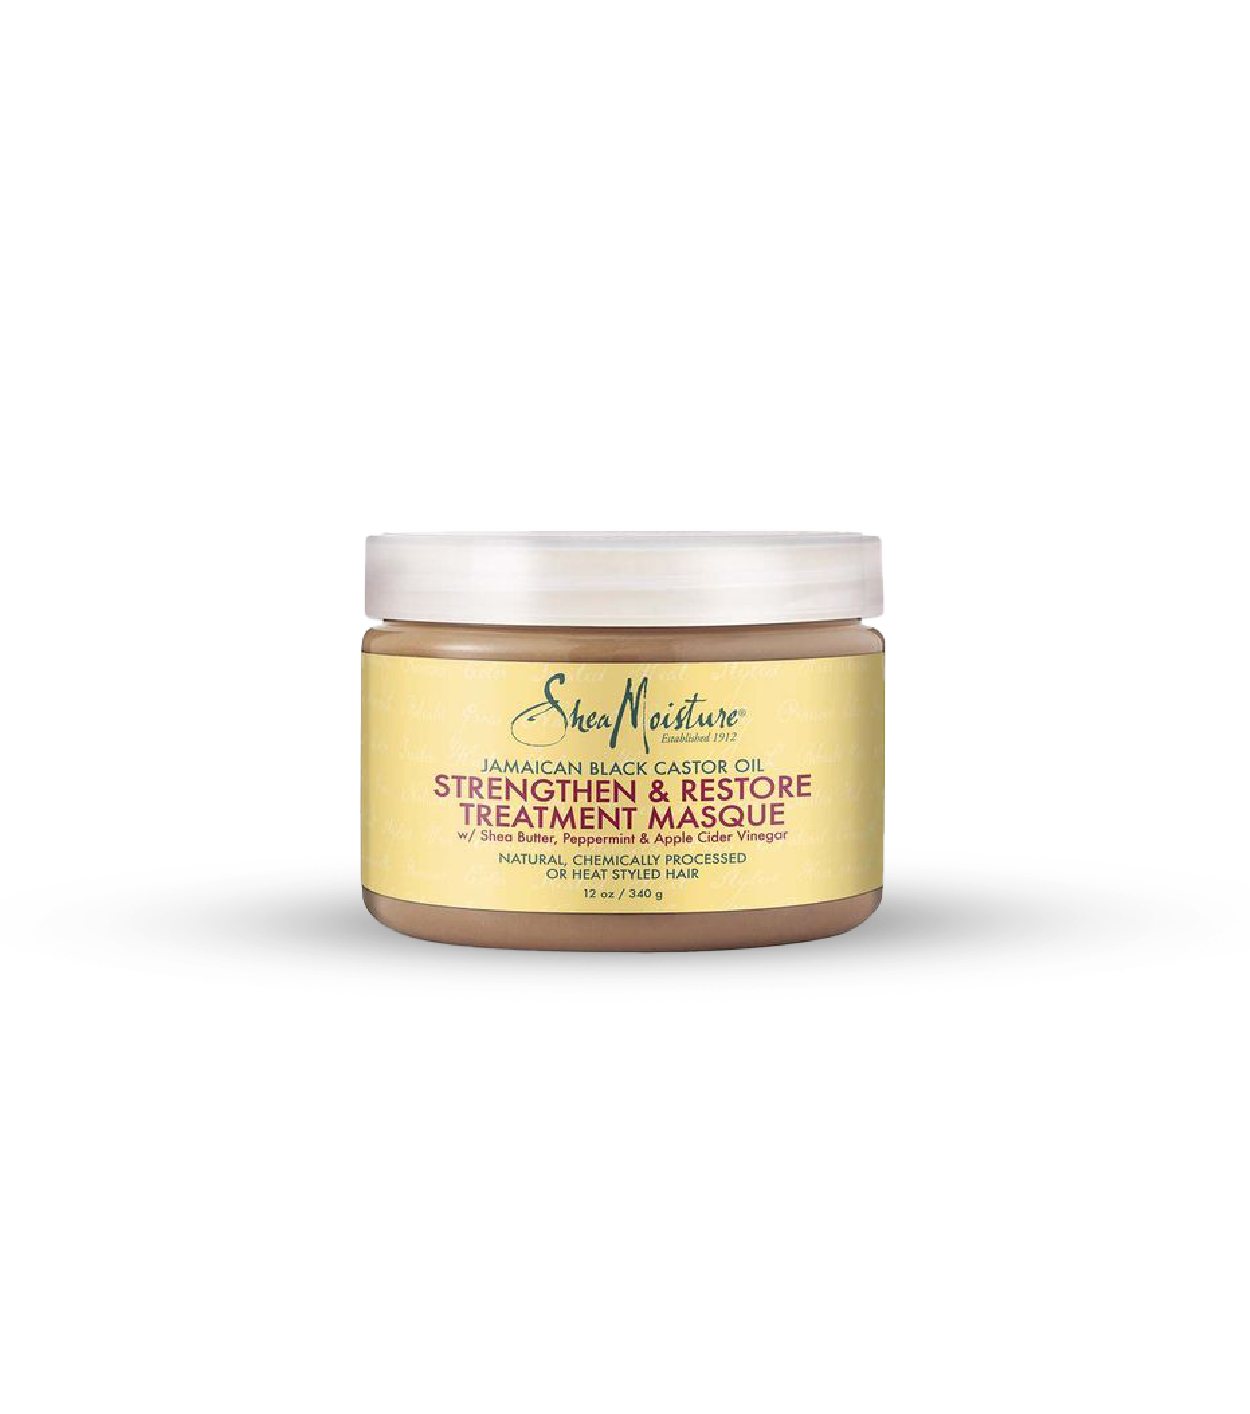 Coldcap.com_Haircare products_Shea strengthen and restore masque